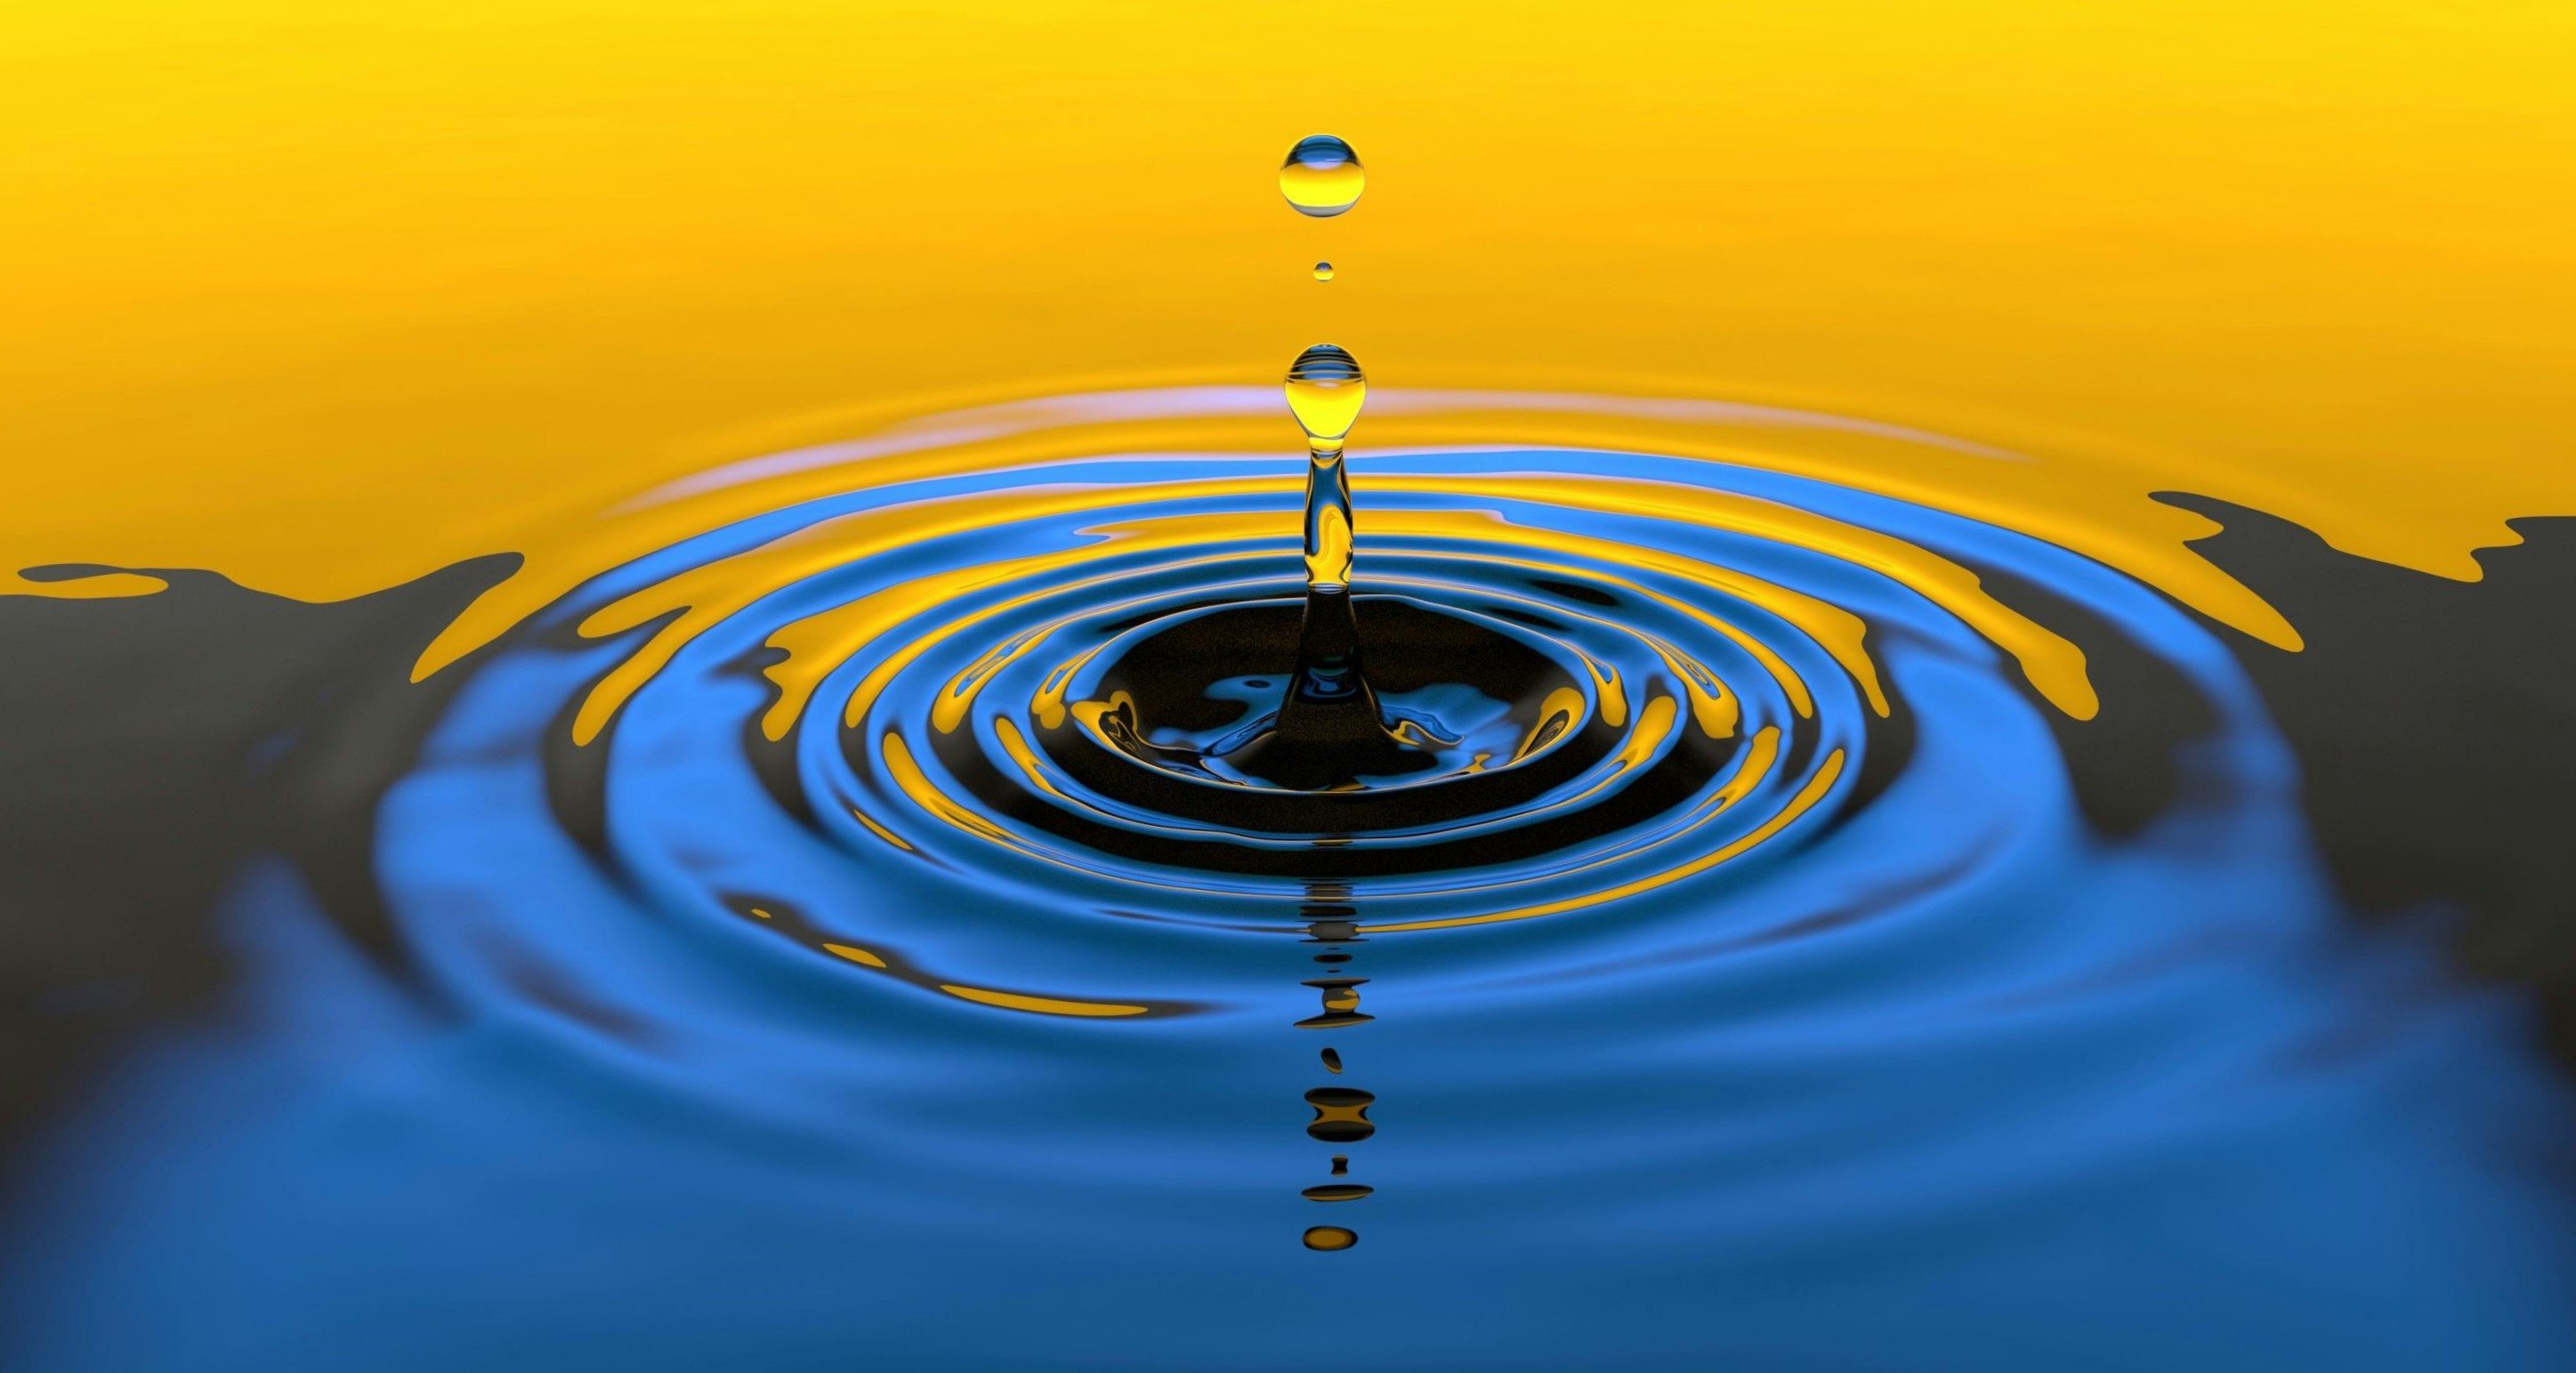 A drop making ripples in water